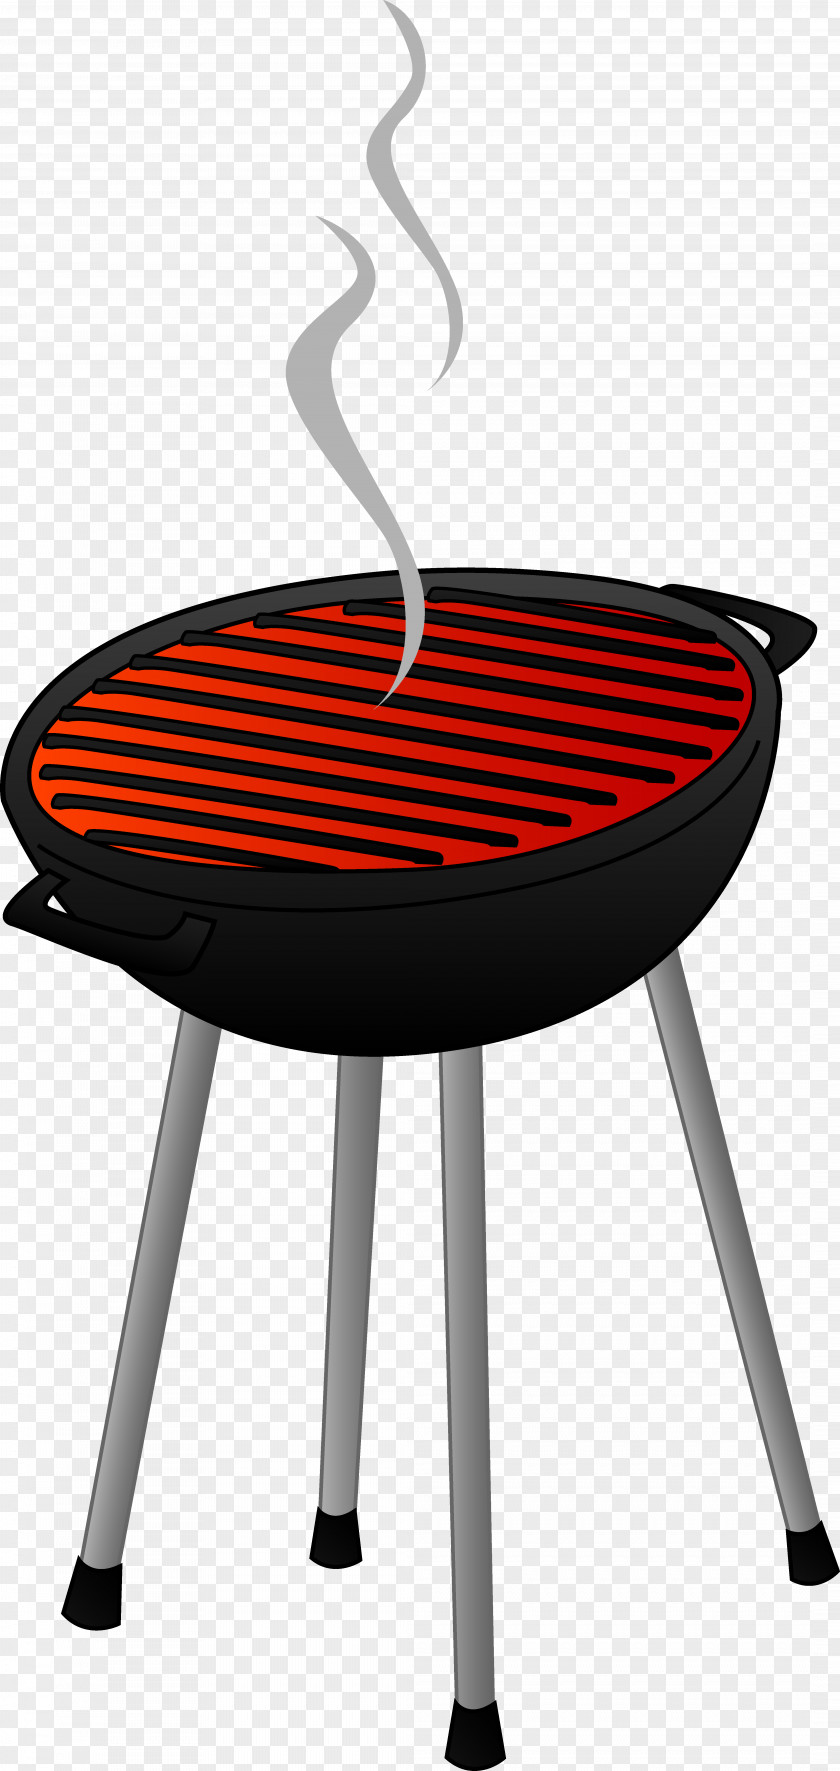 BBQ Cliparts Cooking Barbecue Sauce Grilling Clip Art PNG